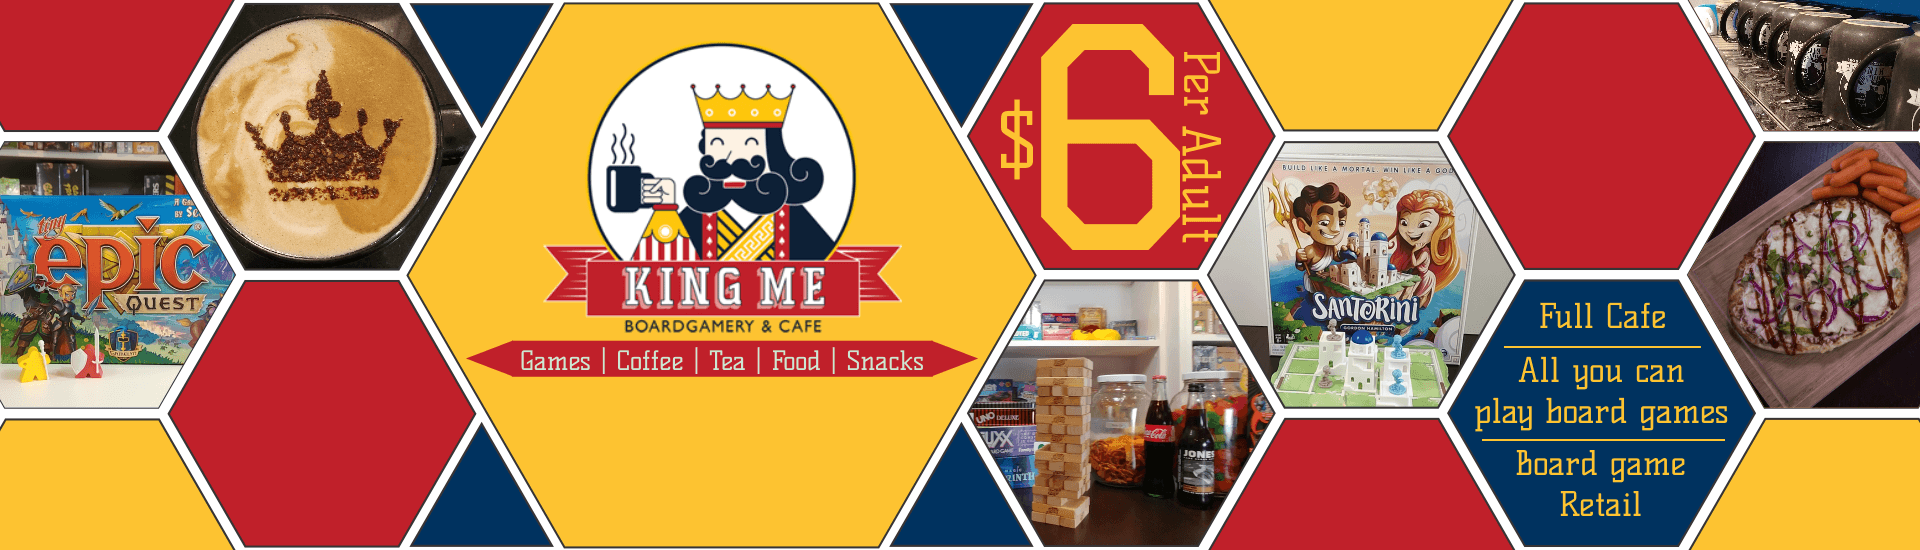 Red and Yellow Cafe Logo - King Me Boardgamery and Cafe